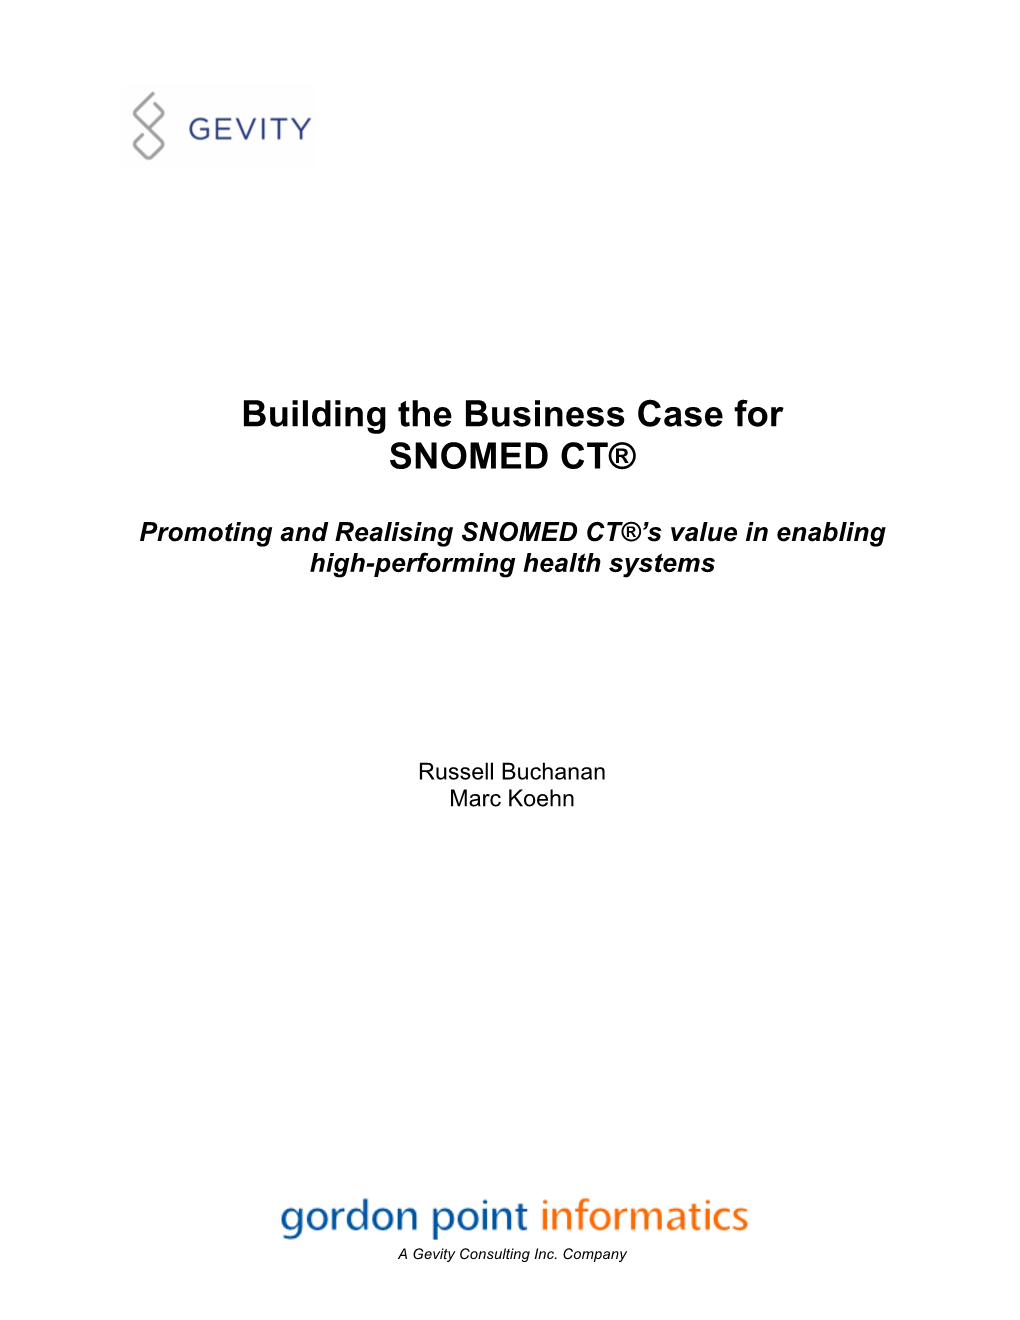 Building the Business Case for SNOMED CT®